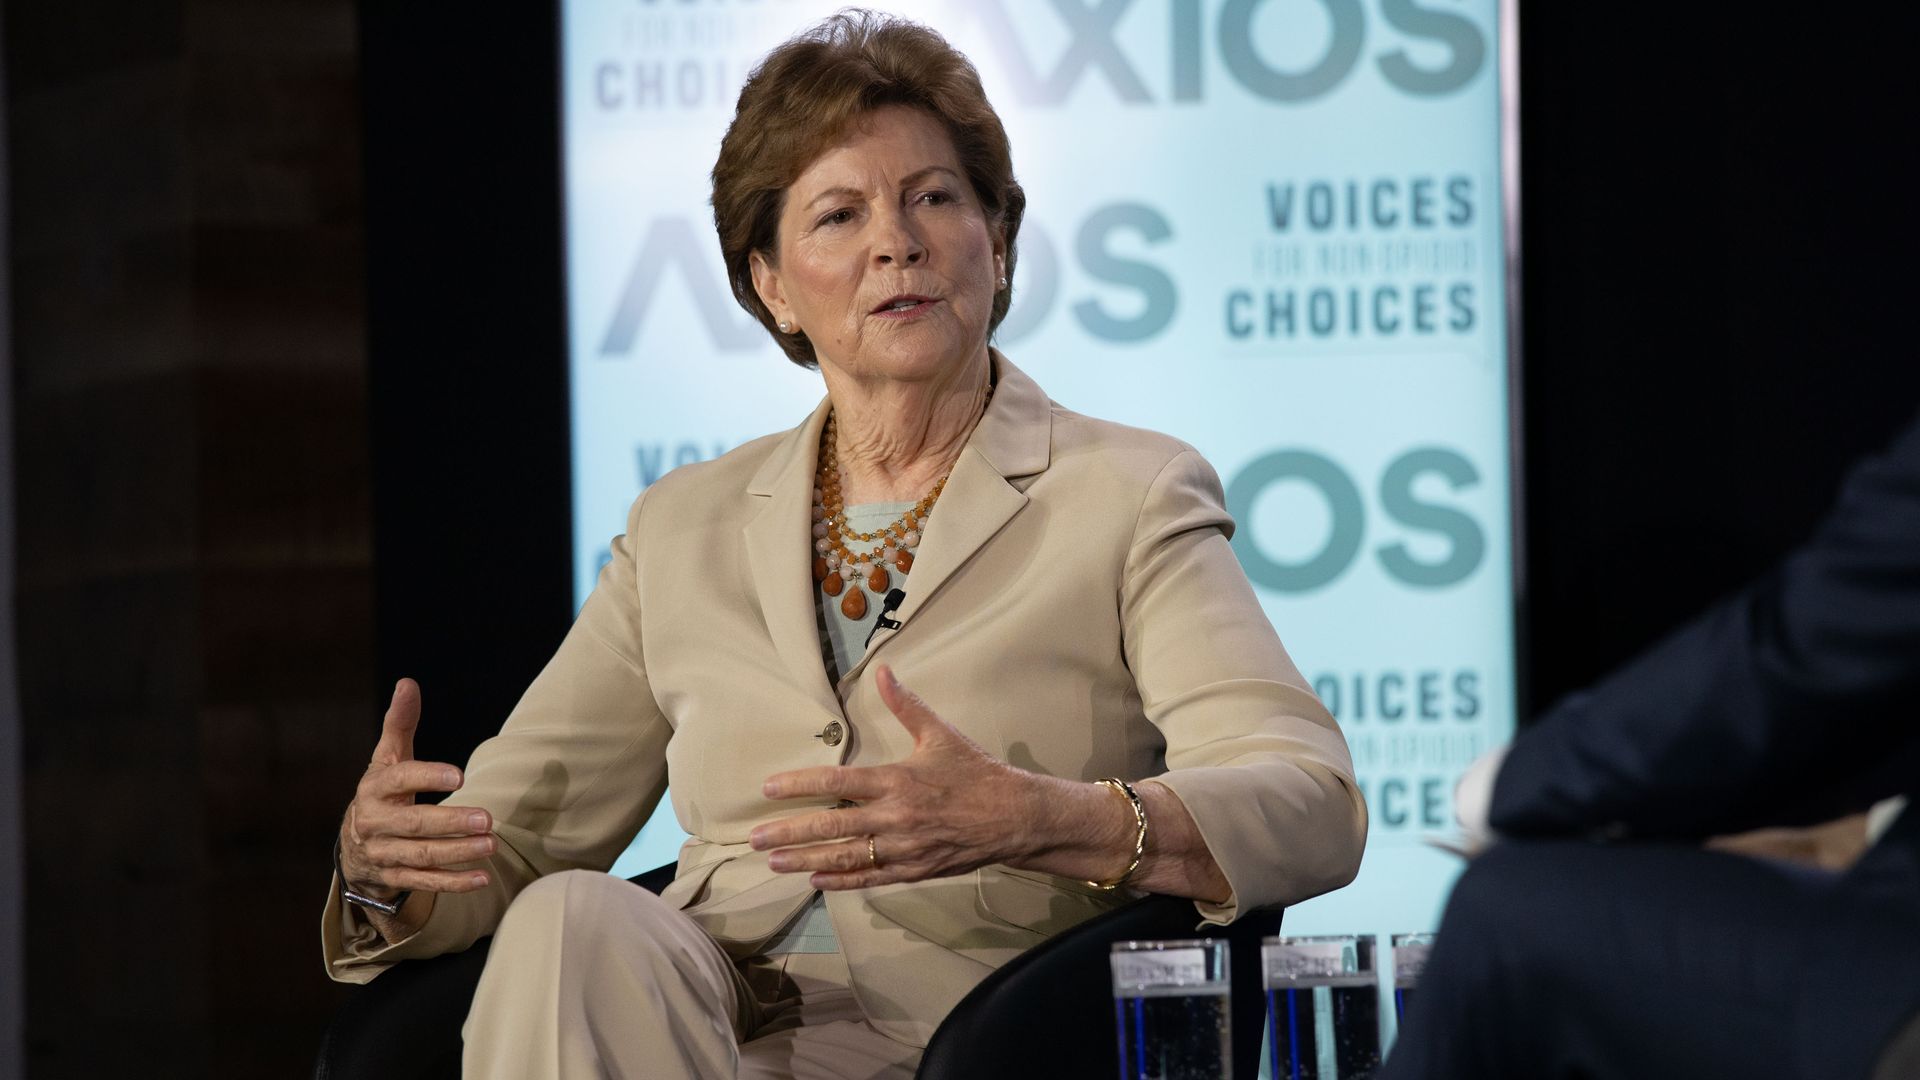 Senator Jeanne Shaheen of New Hampshire on the Axios stage.